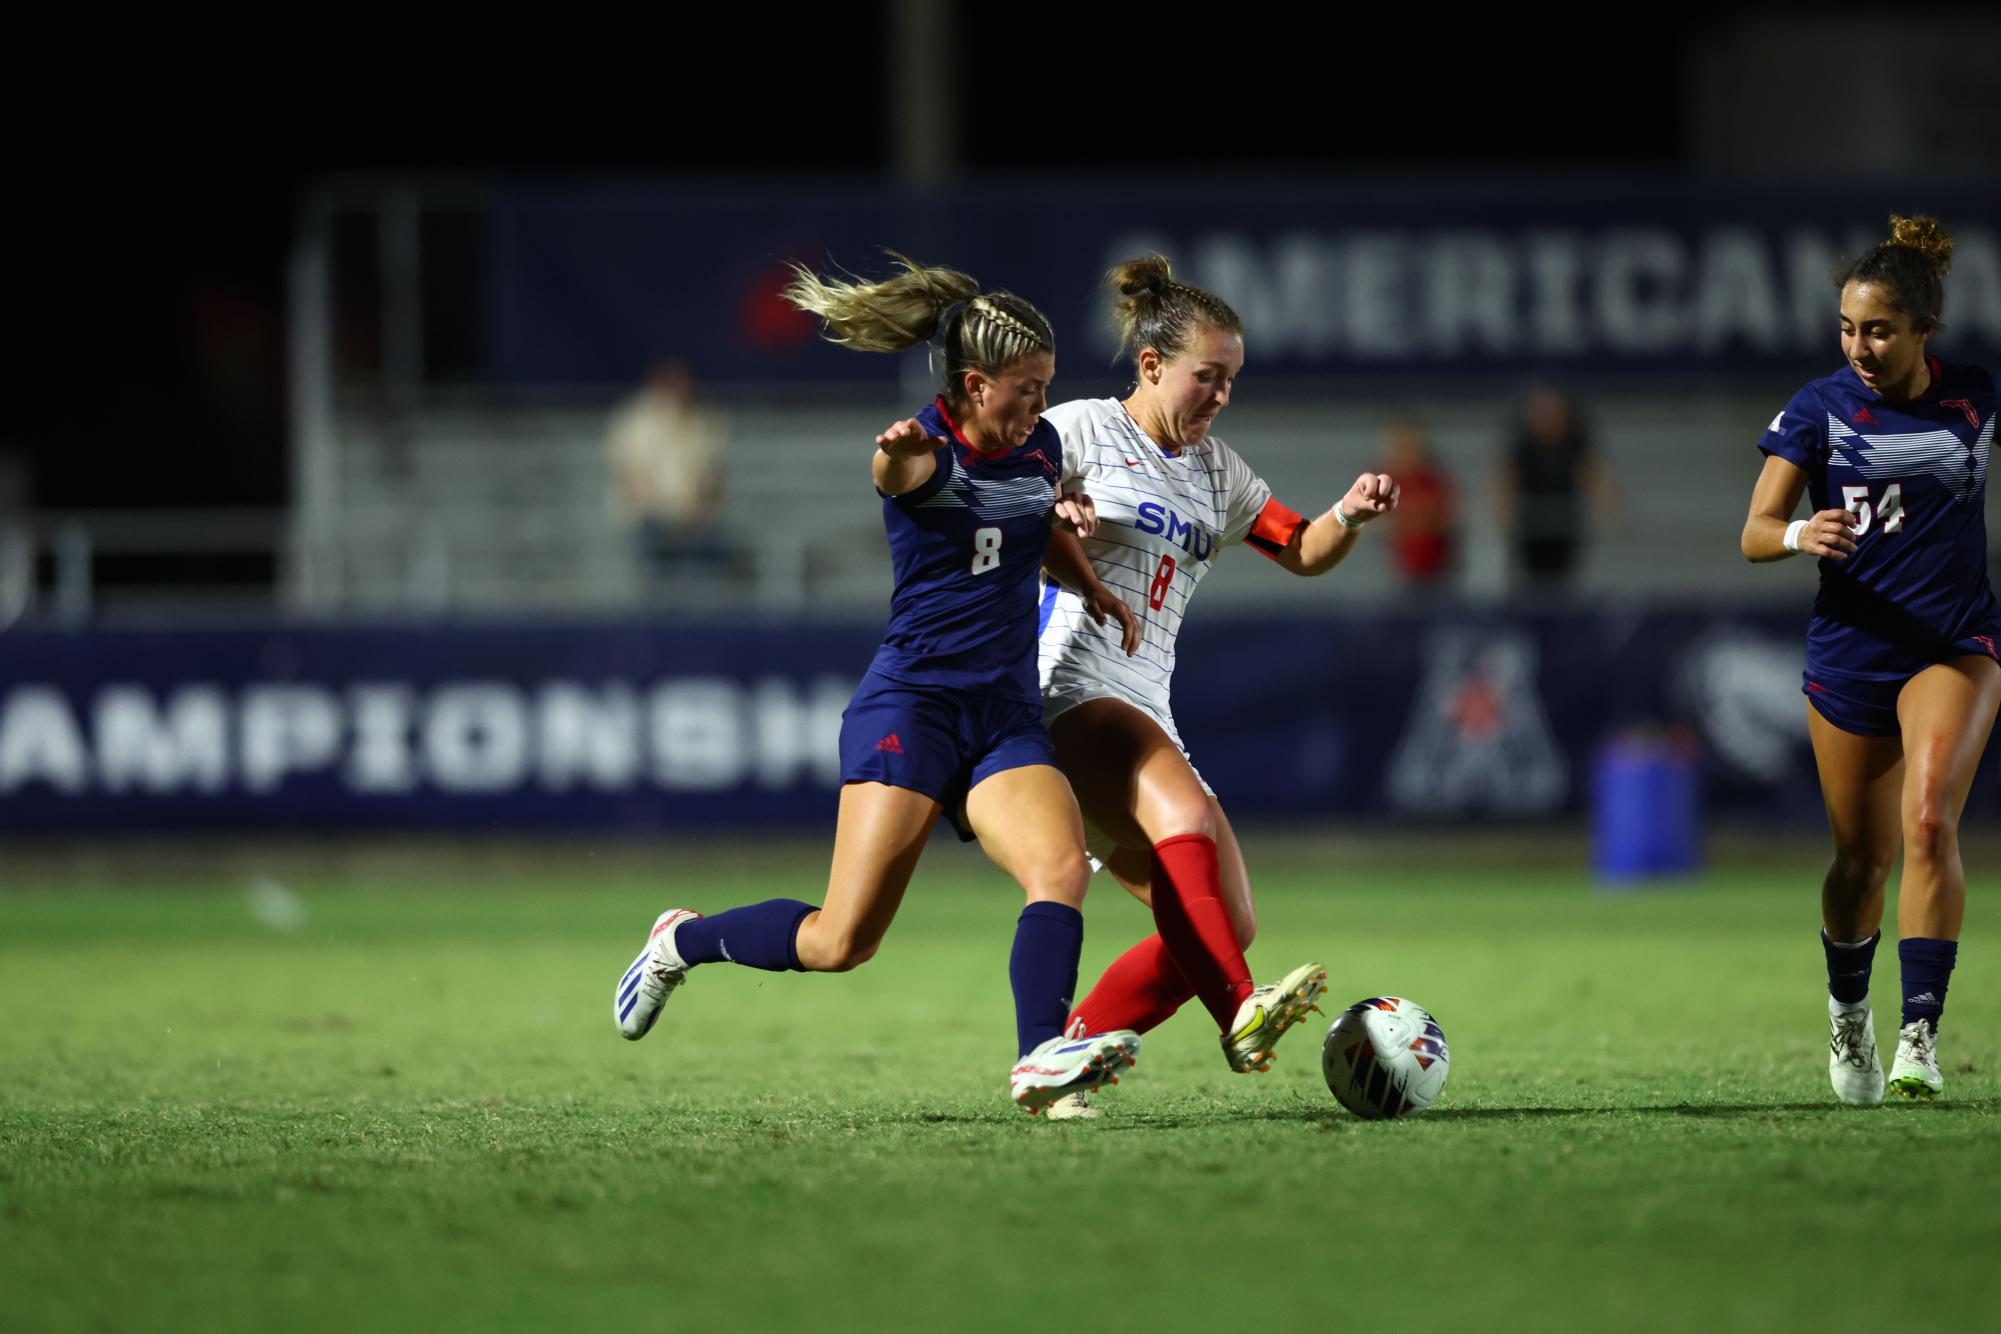 FAU junior forward Drew Dempsey (#8) and SMU senior midfielder Mackenzie Rudden (#8) fighting for the ball during the Owls 3-0 loss to the Mustangs in the semifinals of the AAC Womens Soccer Tournament on Thursday, Nov. 2, 2023.